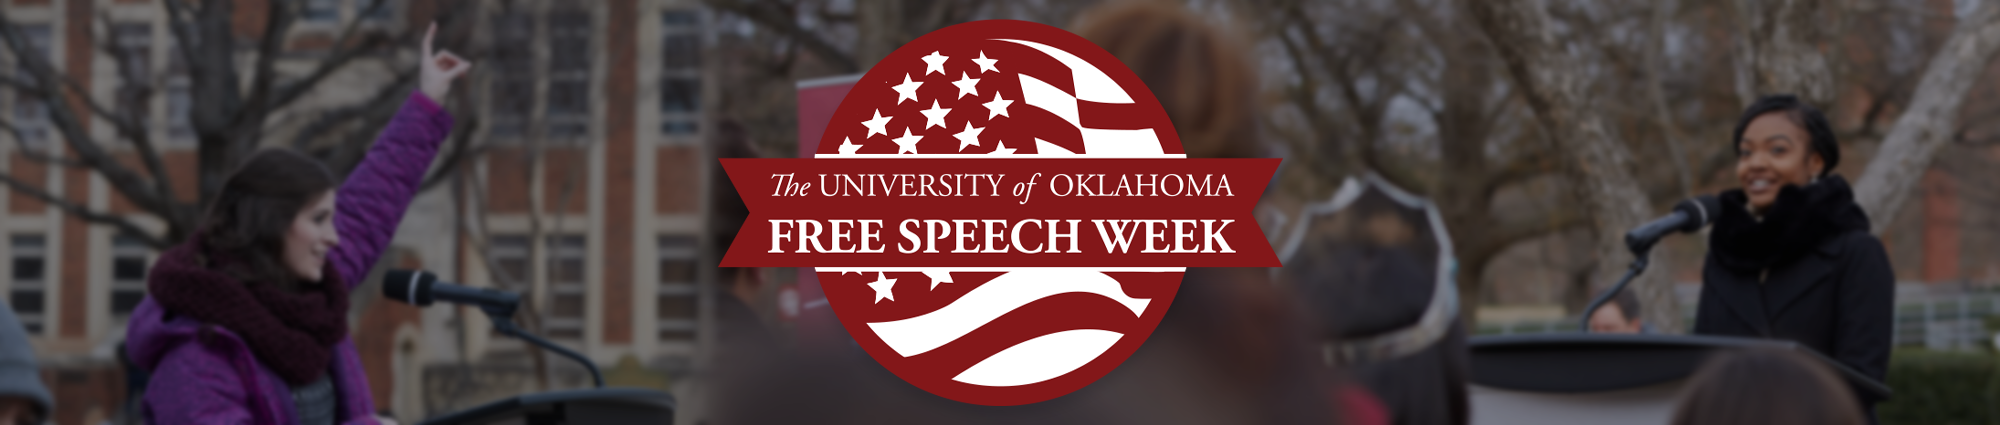 The University of Oklahoma Free Speech Week logo, with people standing near a podium on OU's campus